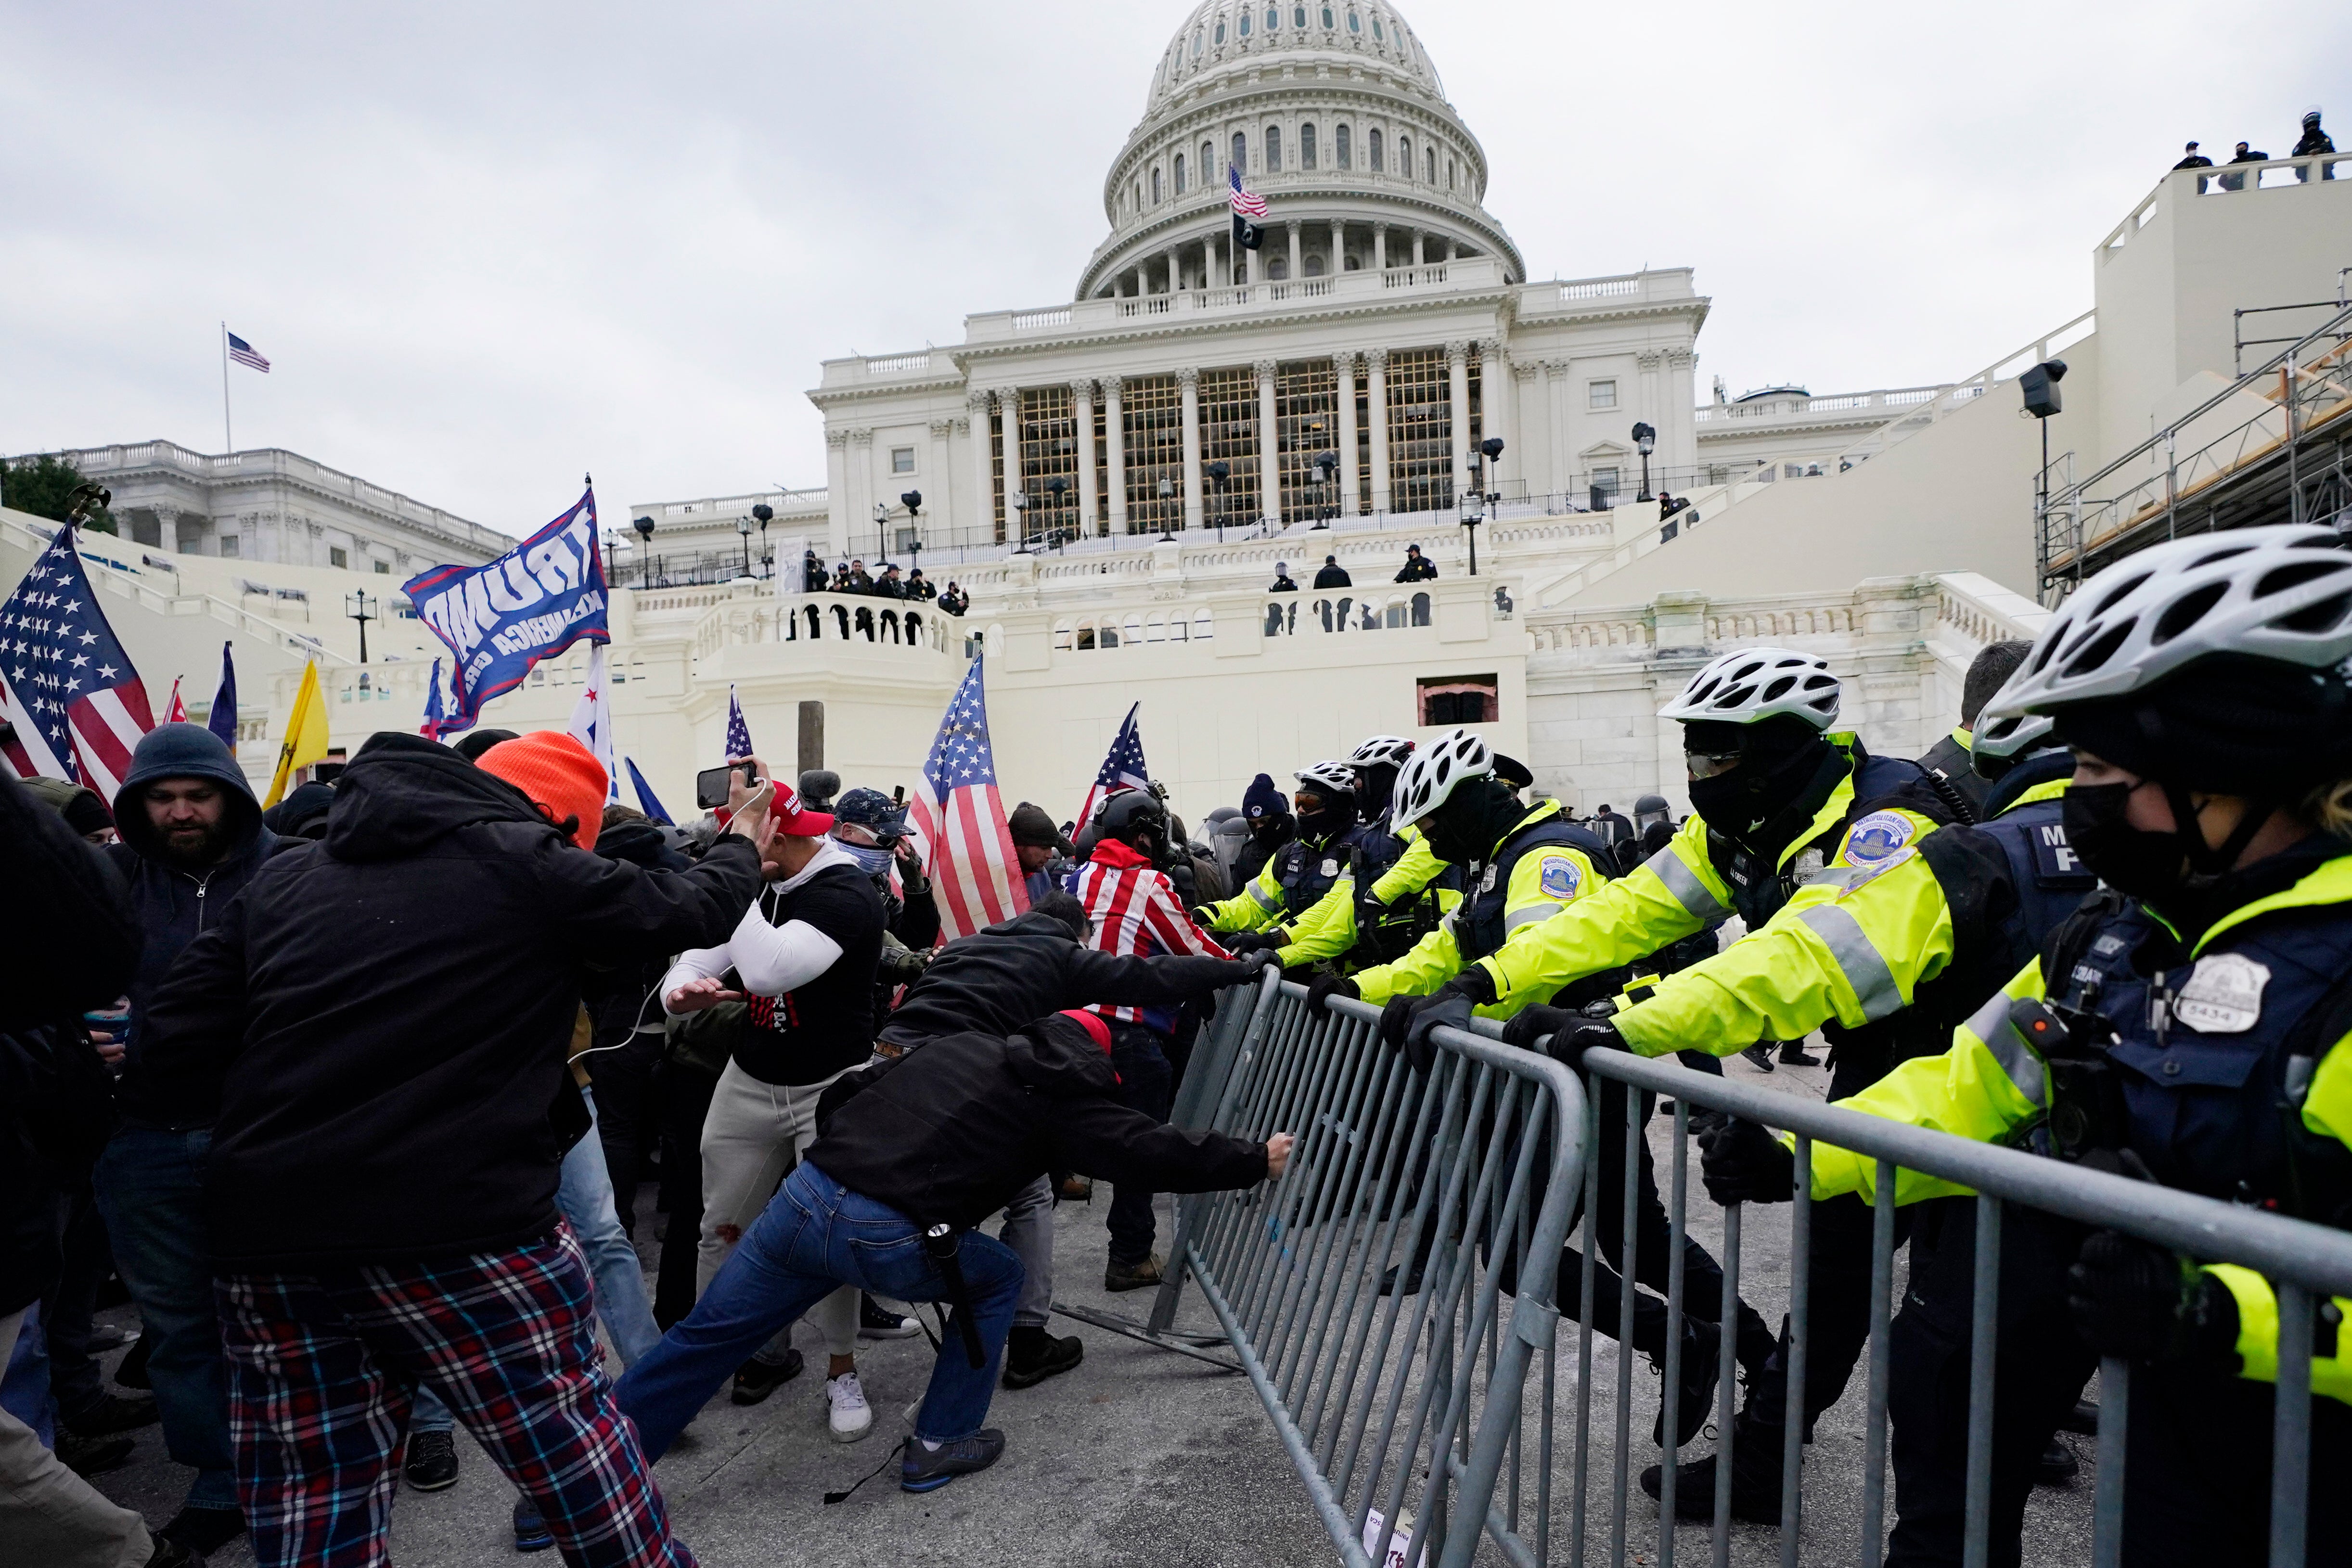 MAGA rioters lay siege to the US Capitol Building on 6 January 2021